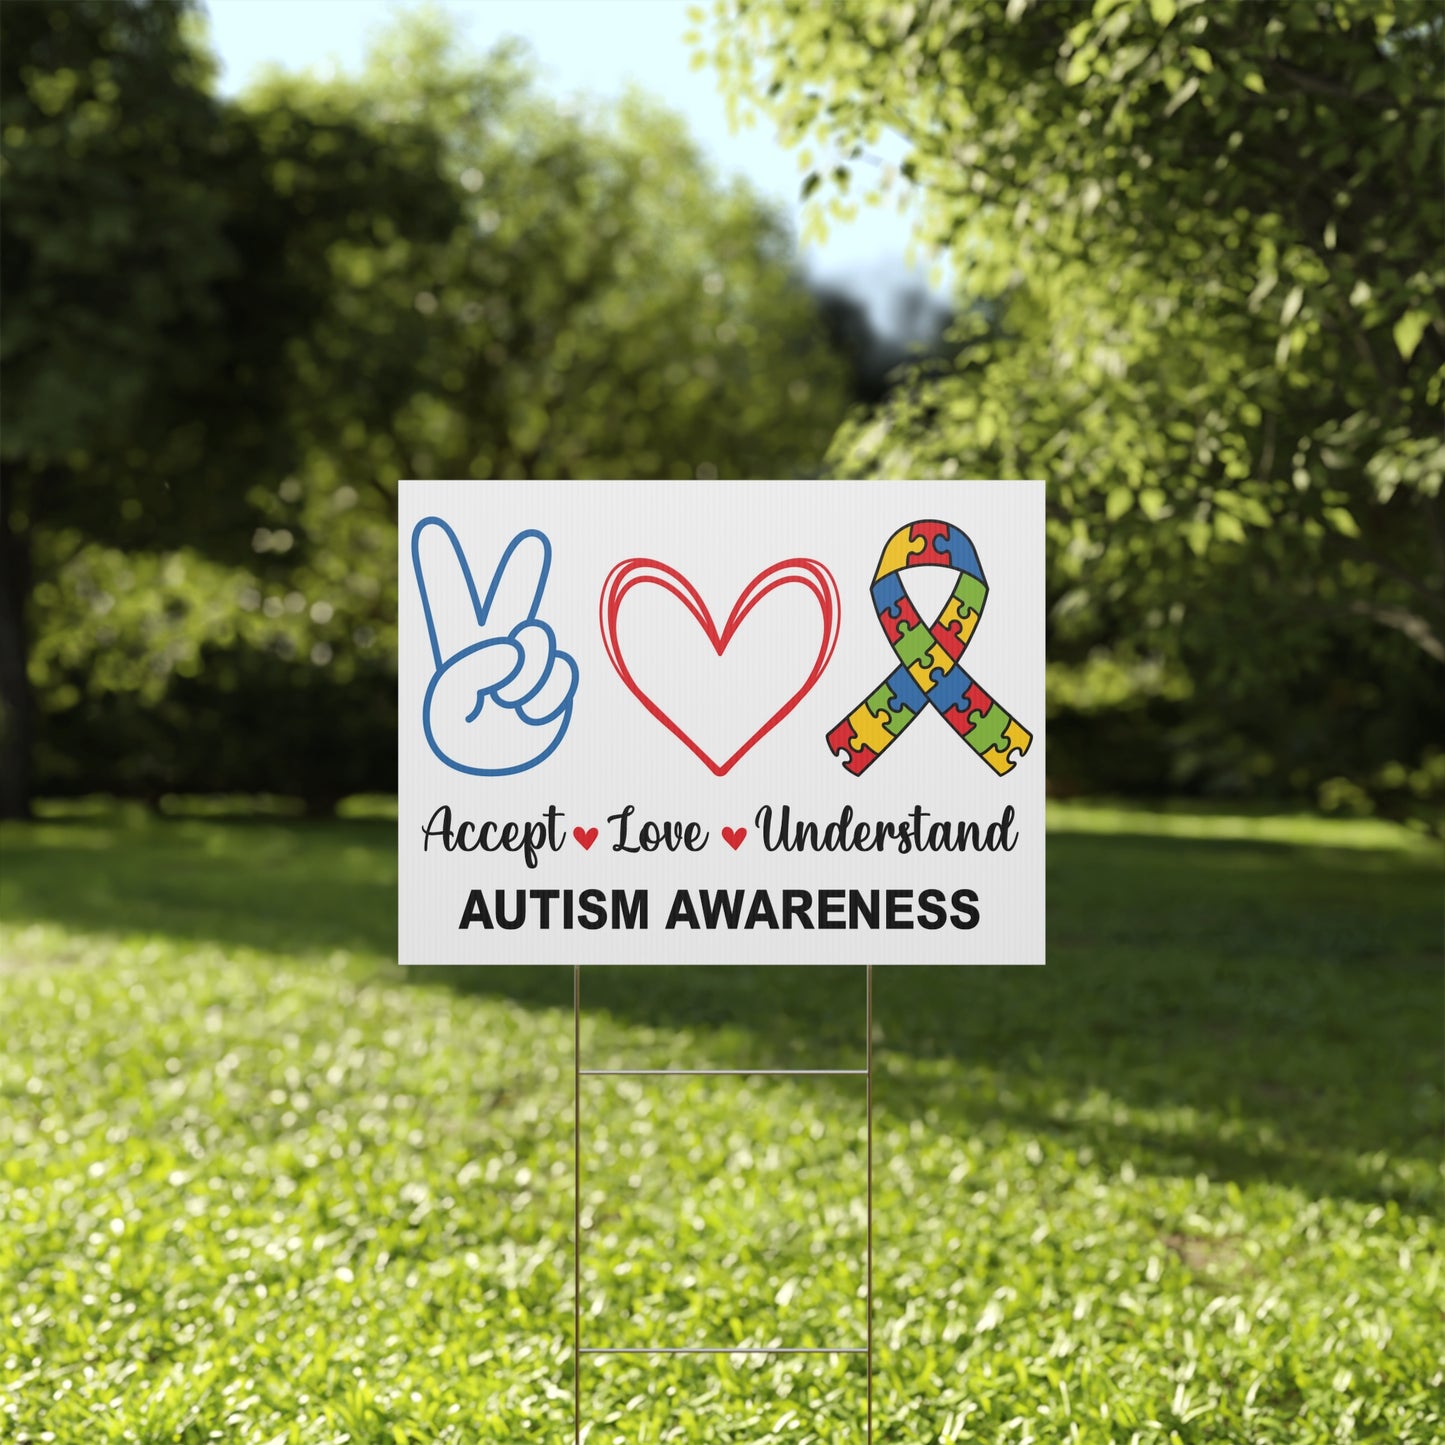 Autism Awareness Yard Sign, 18x12, 24x18, 36x24, Double Sided, H-Stake Included, v4